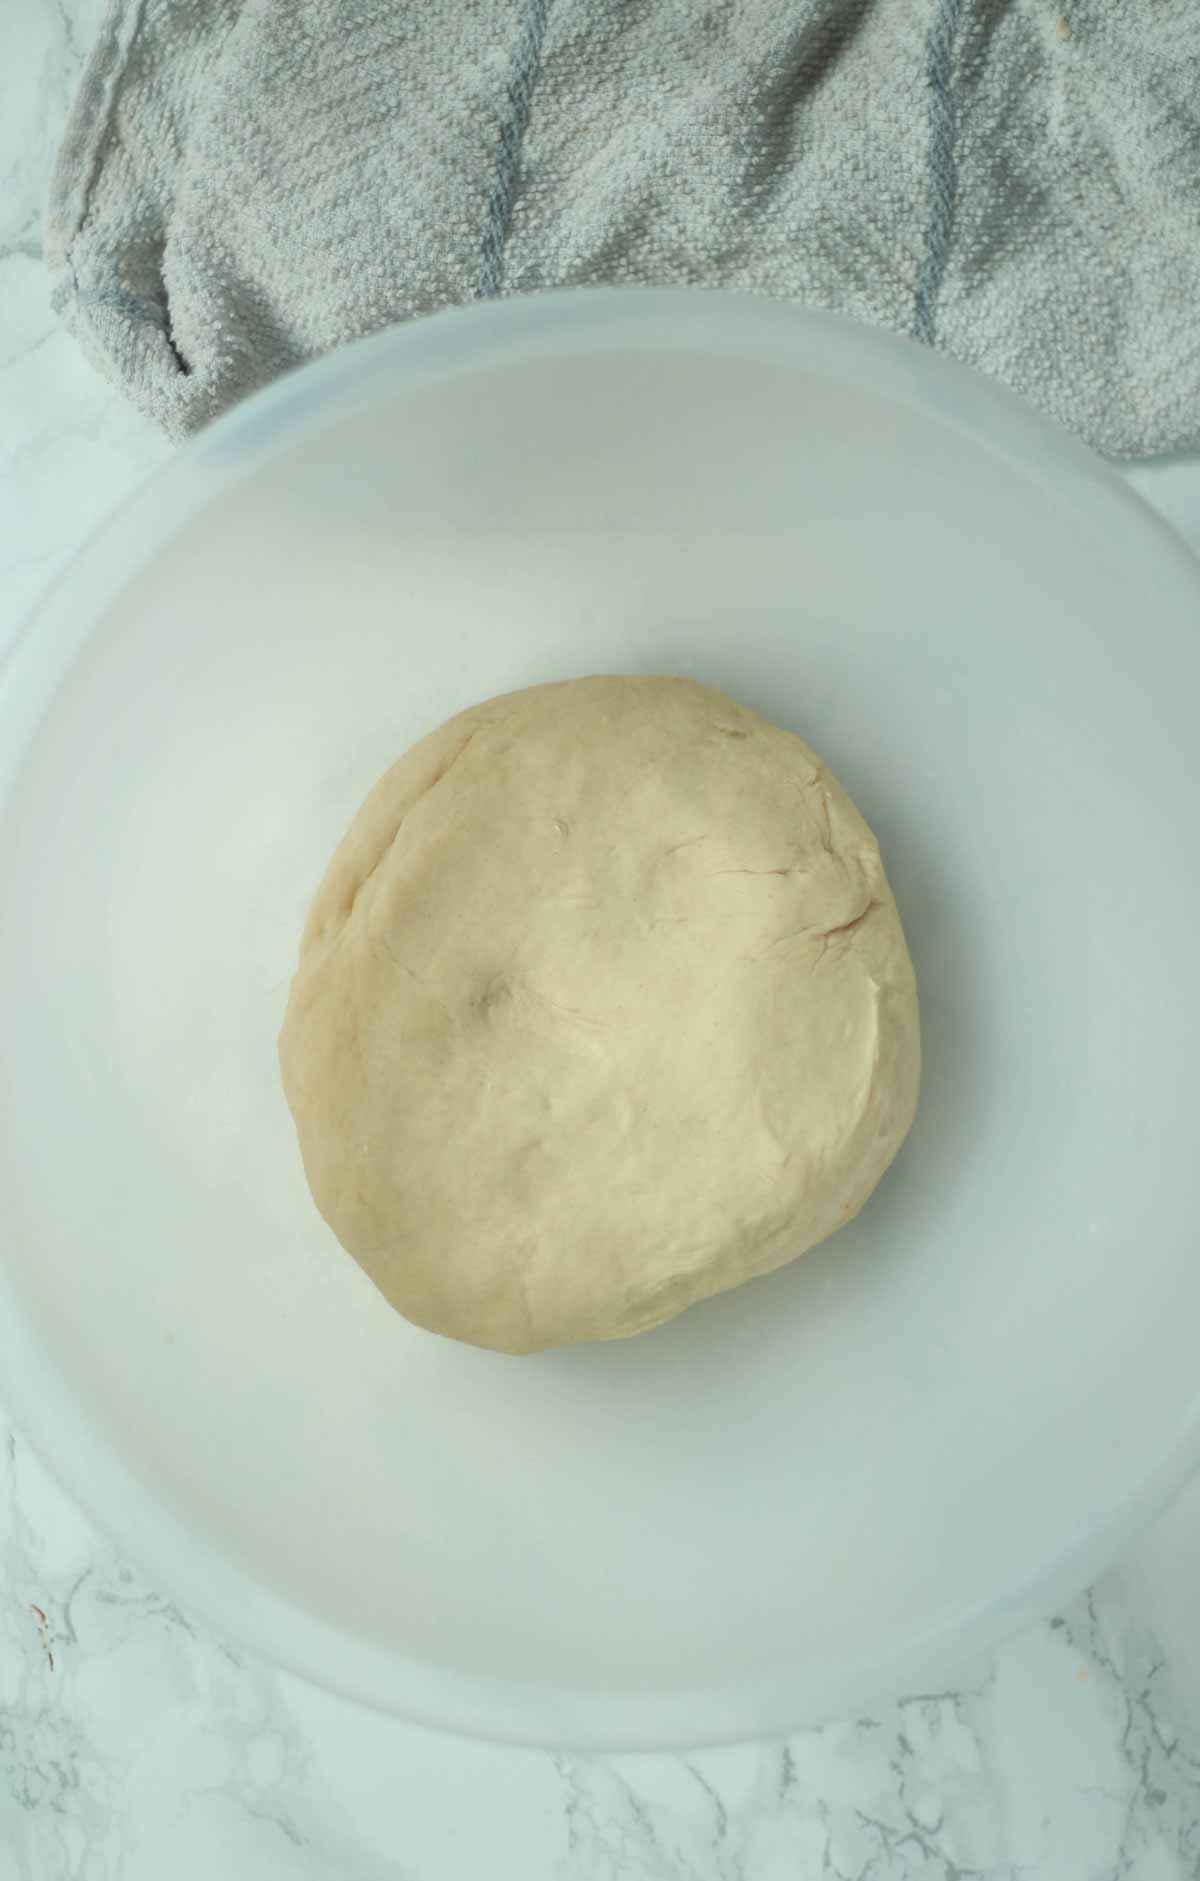 Soft Ball Of Dough In A Bowl